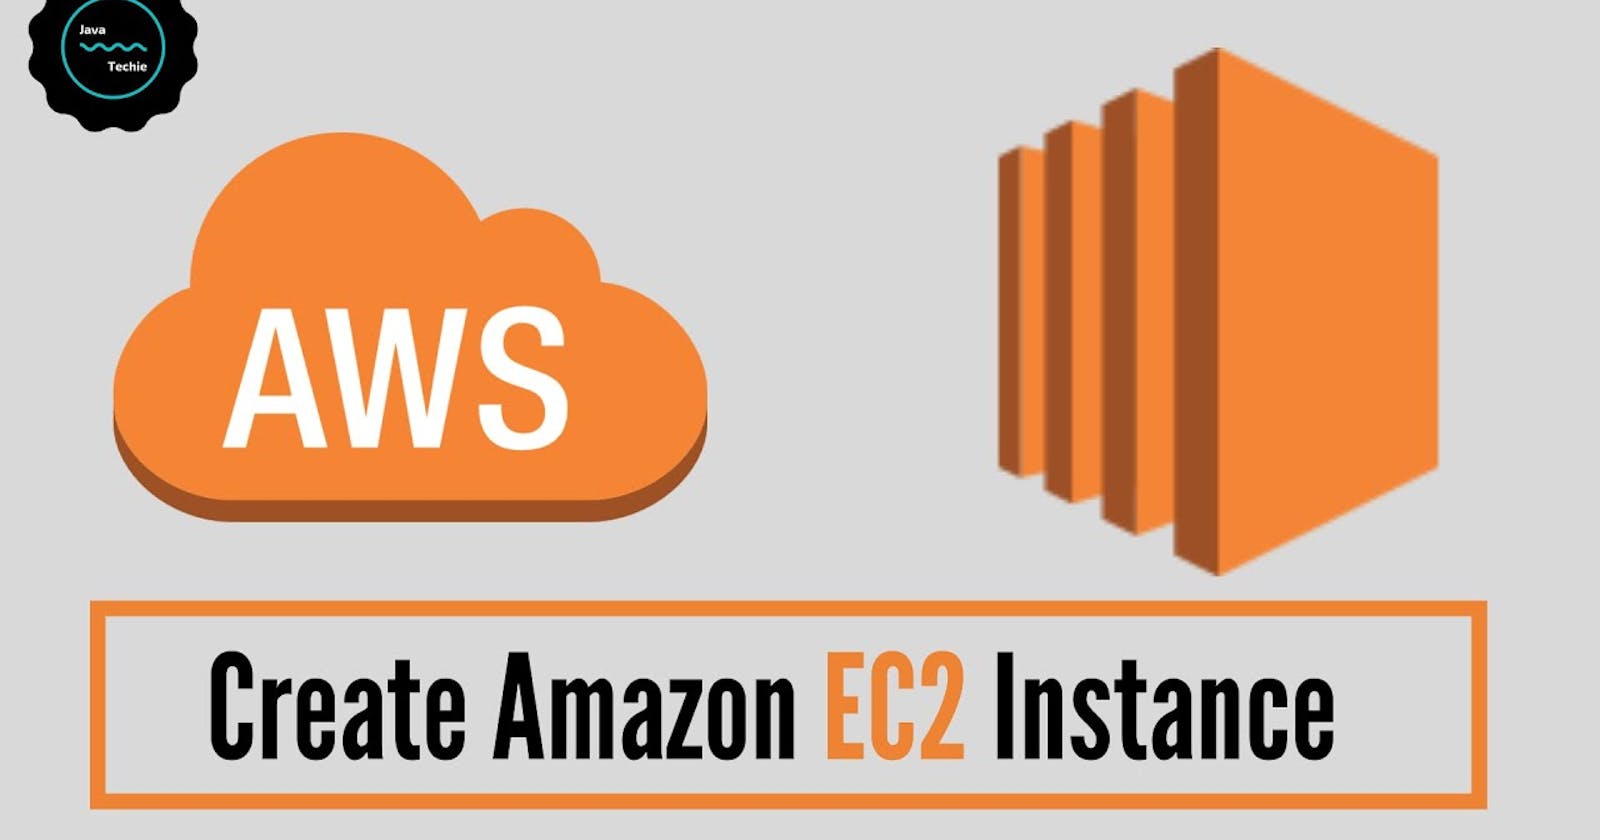 How to create EC2 Windows Instance using AWS management console